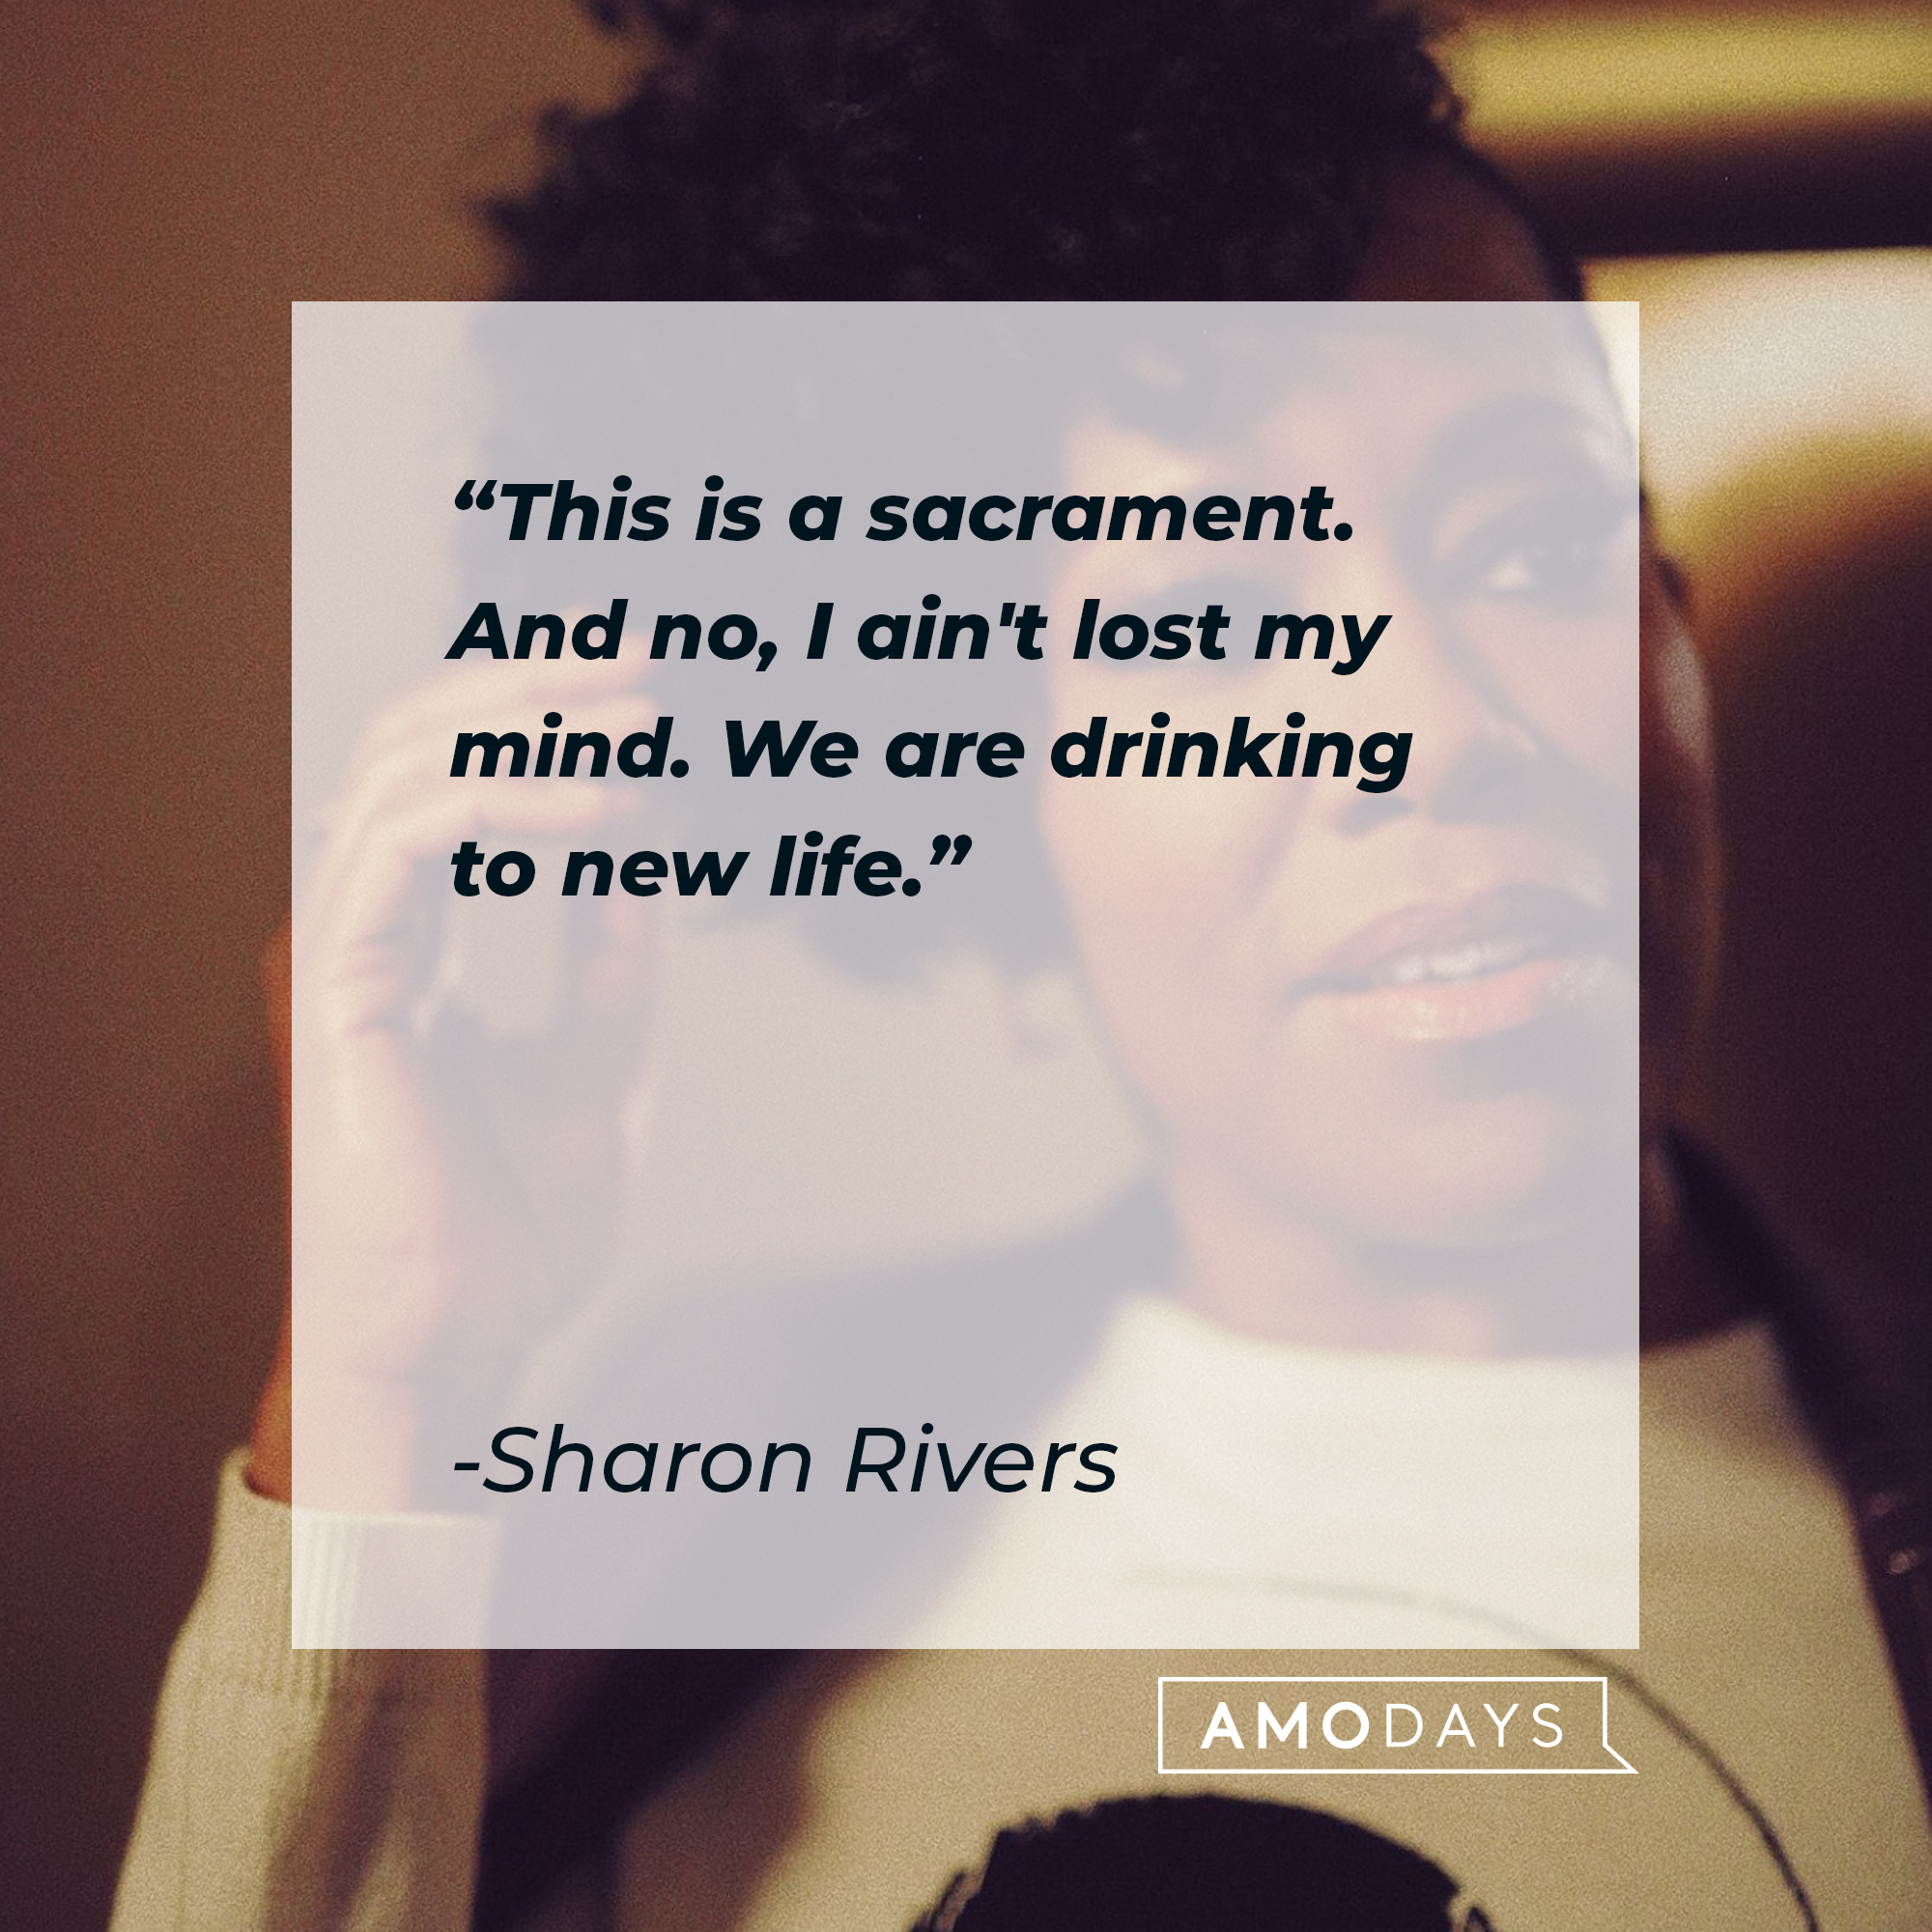 Sharon Rivers quote: “This is a sacrament. And no, I ain't lost my mind. We are drinking to new life.” | Source: facebook.com/BealeStreet